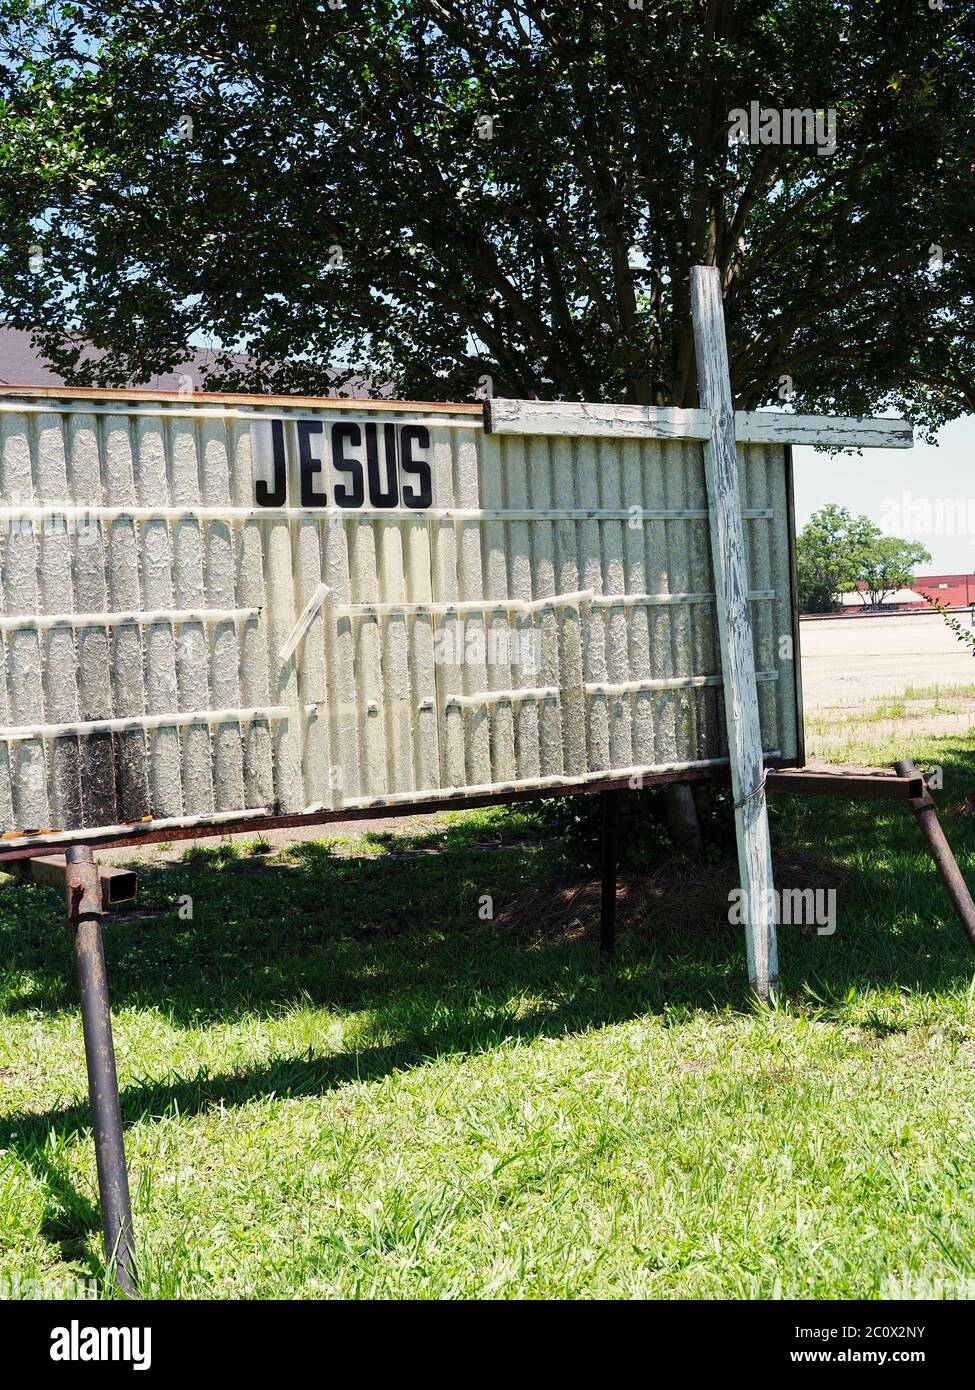 Old, aging and dilapidated church sign with the name Jesus displayed standing next to a white cross with peeling paint in Montgomery Alabama USA. Stock Photo